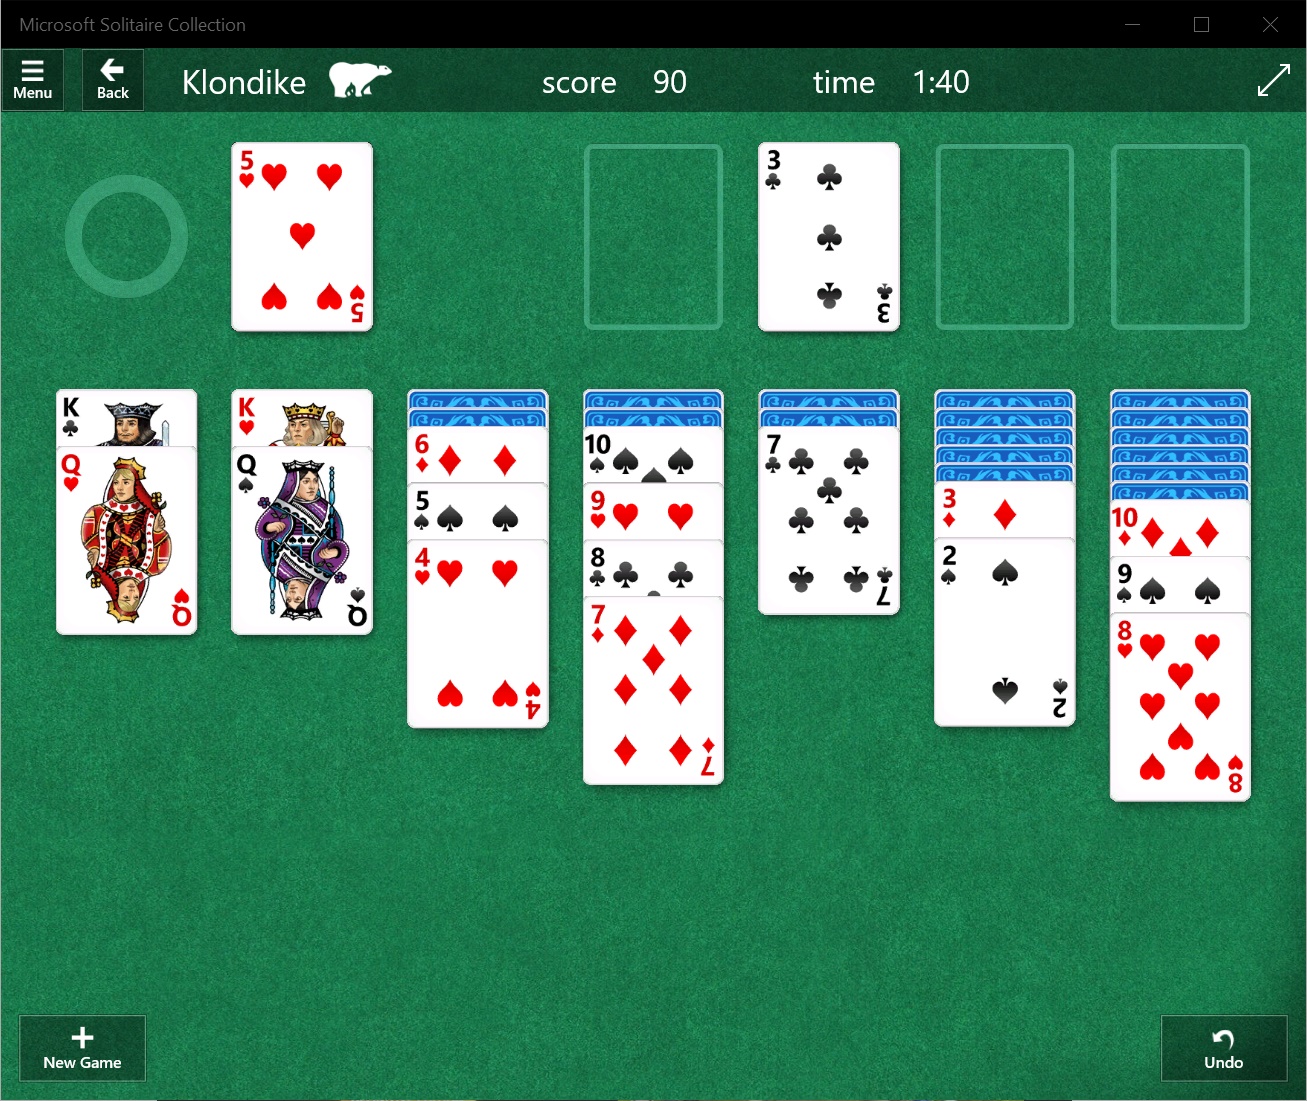 microsoft solitaire collection klondike badges